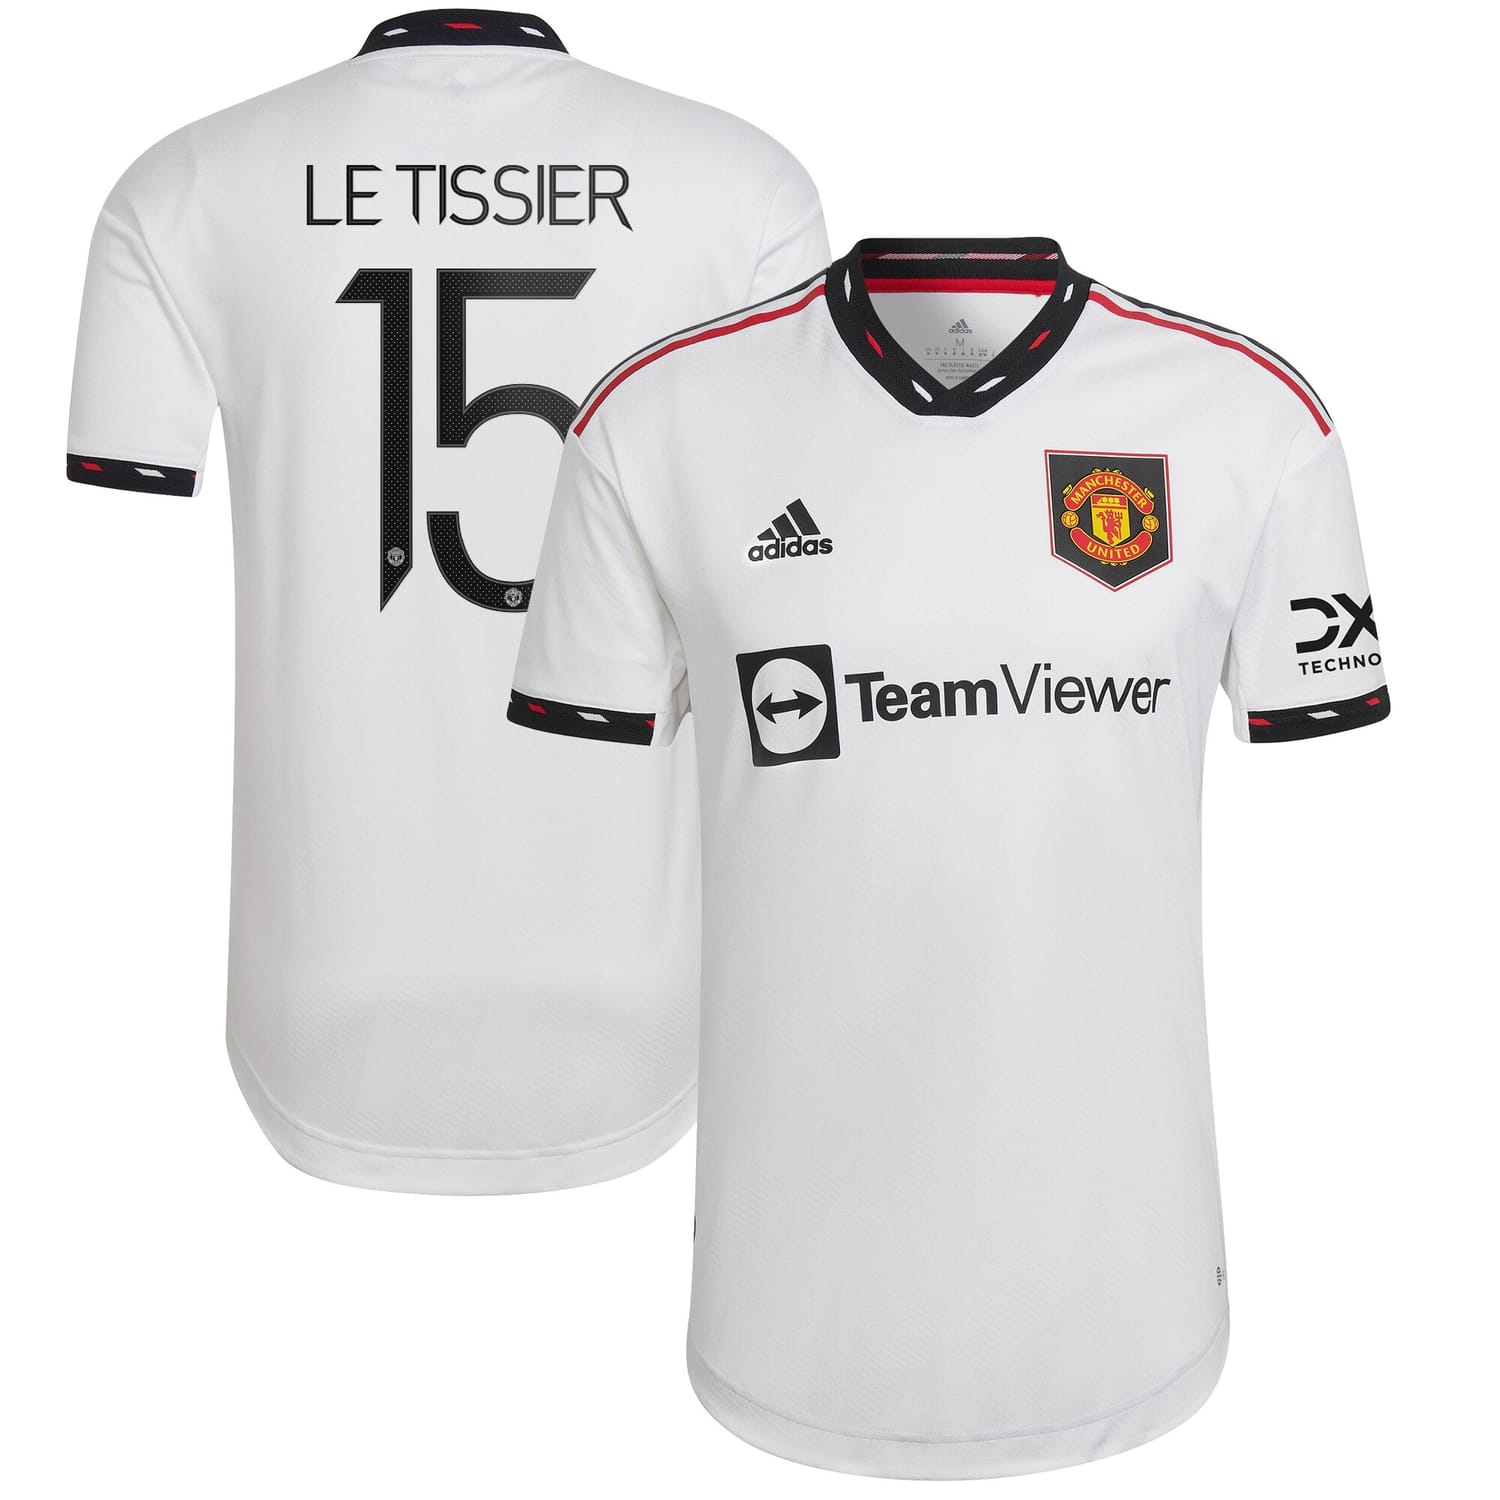 Premier League Manchester United Away Cup Authentic Jersey Shirt 2022-23 player Maya Le Tissier 15 printing for Men